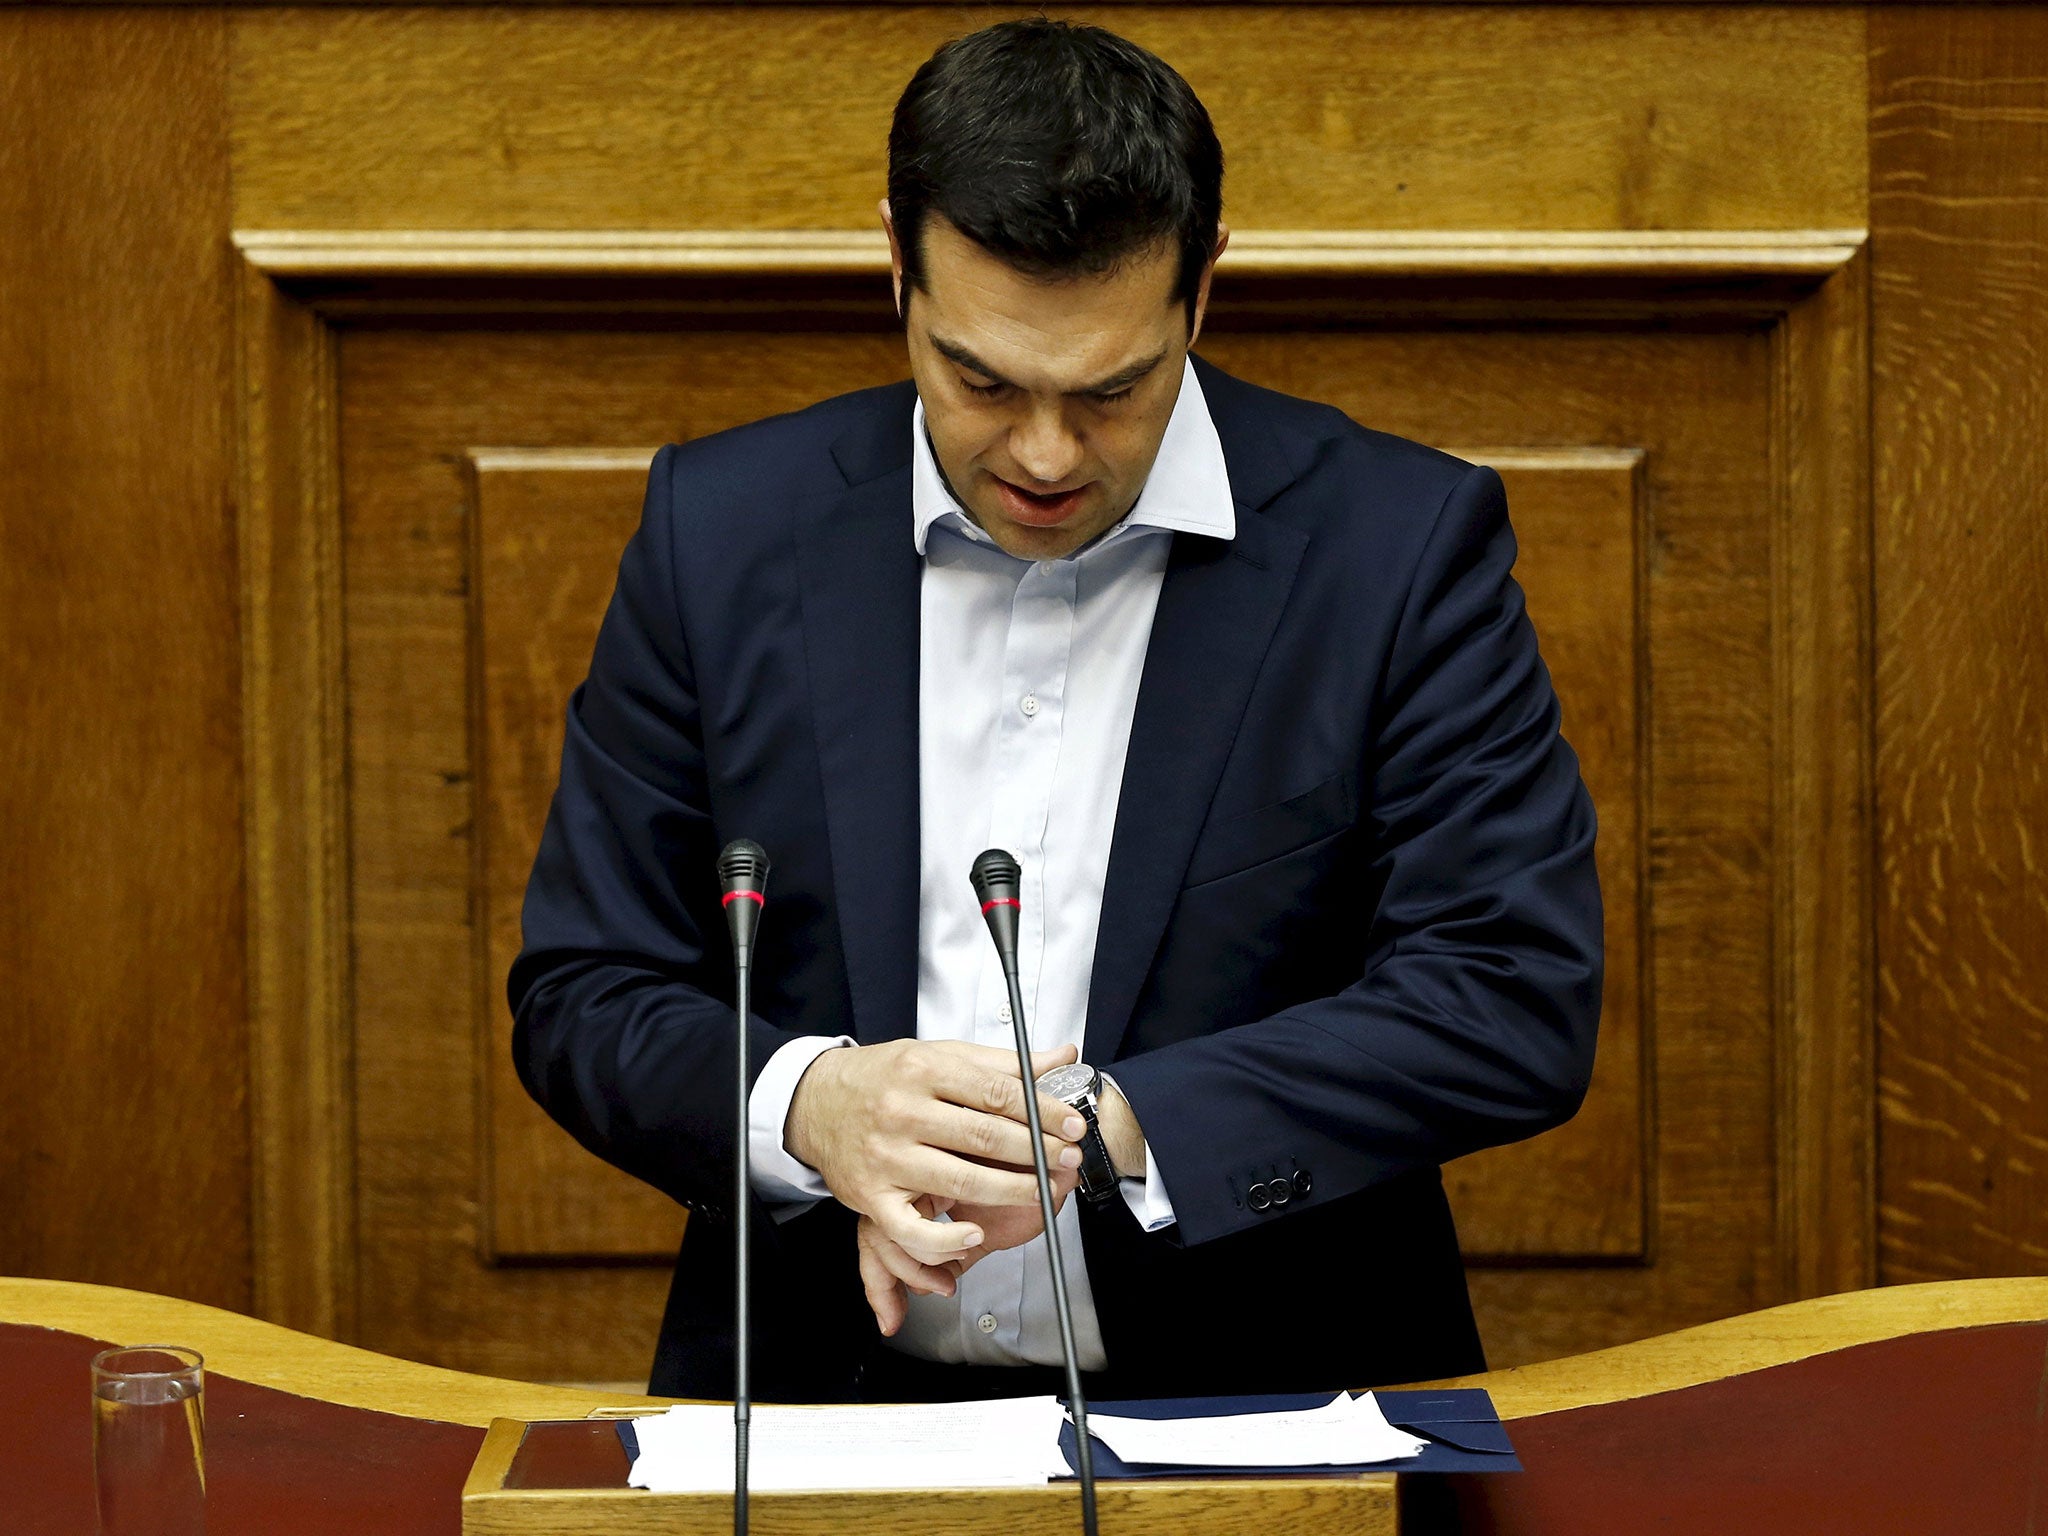 Greek Prime Minister Alexis Tsipras has been branded reckless and a feckless liar by EU leaders